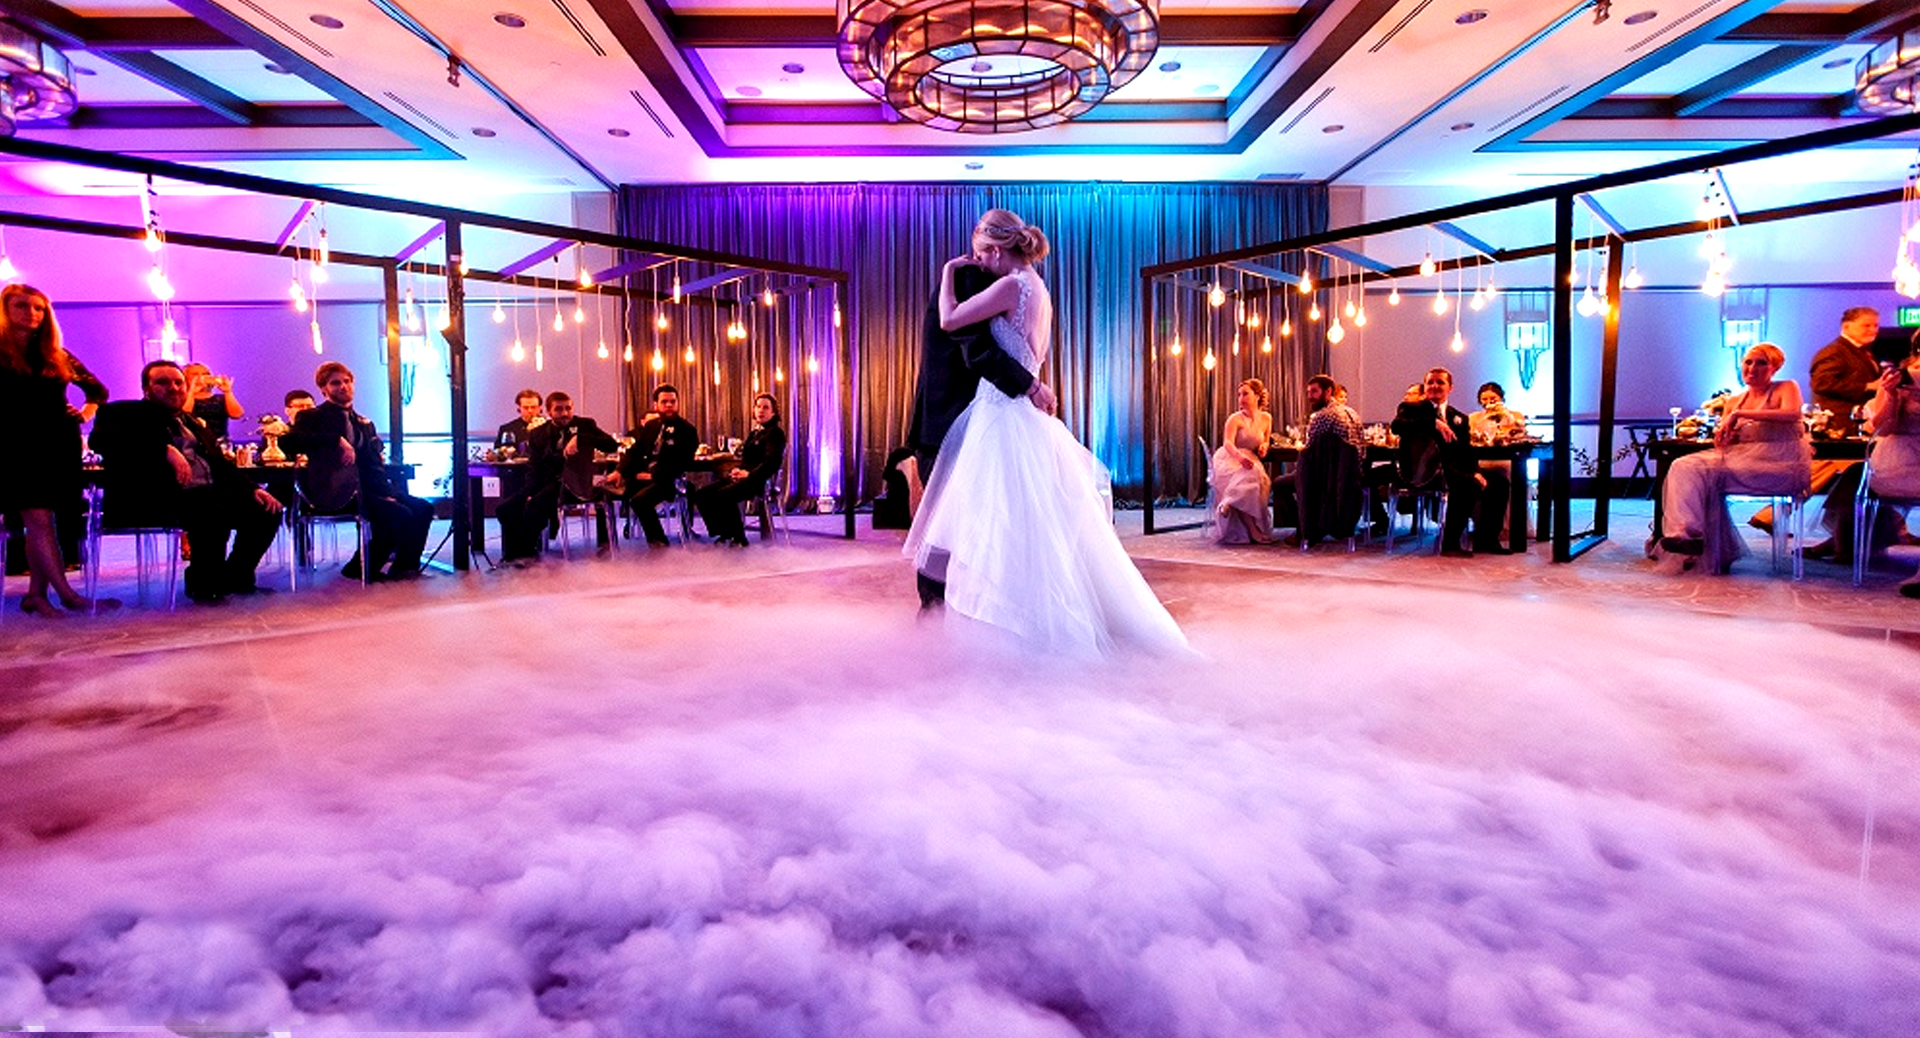 Why Hire A DJ For Your Wedding